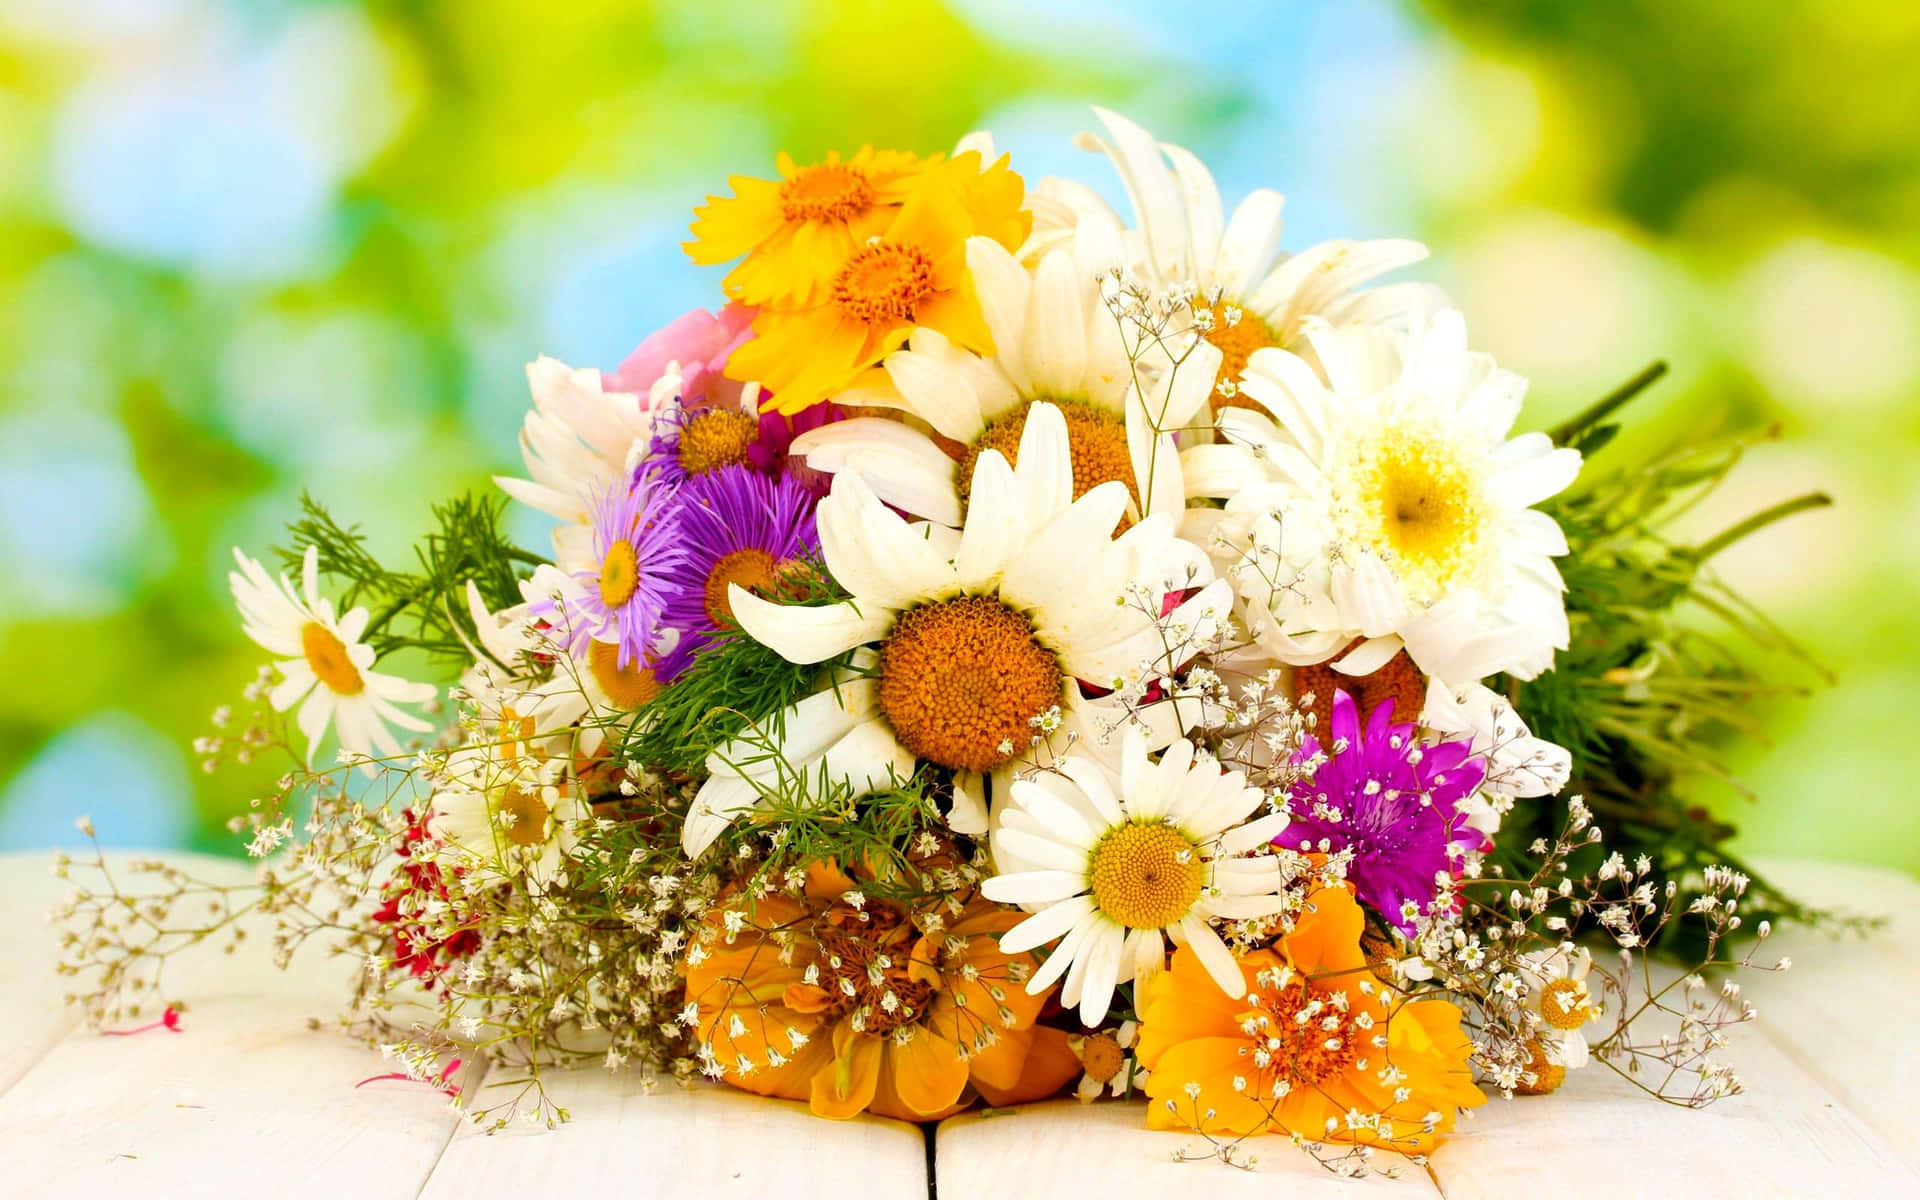 Celebrate life with Flowers Wallpaper